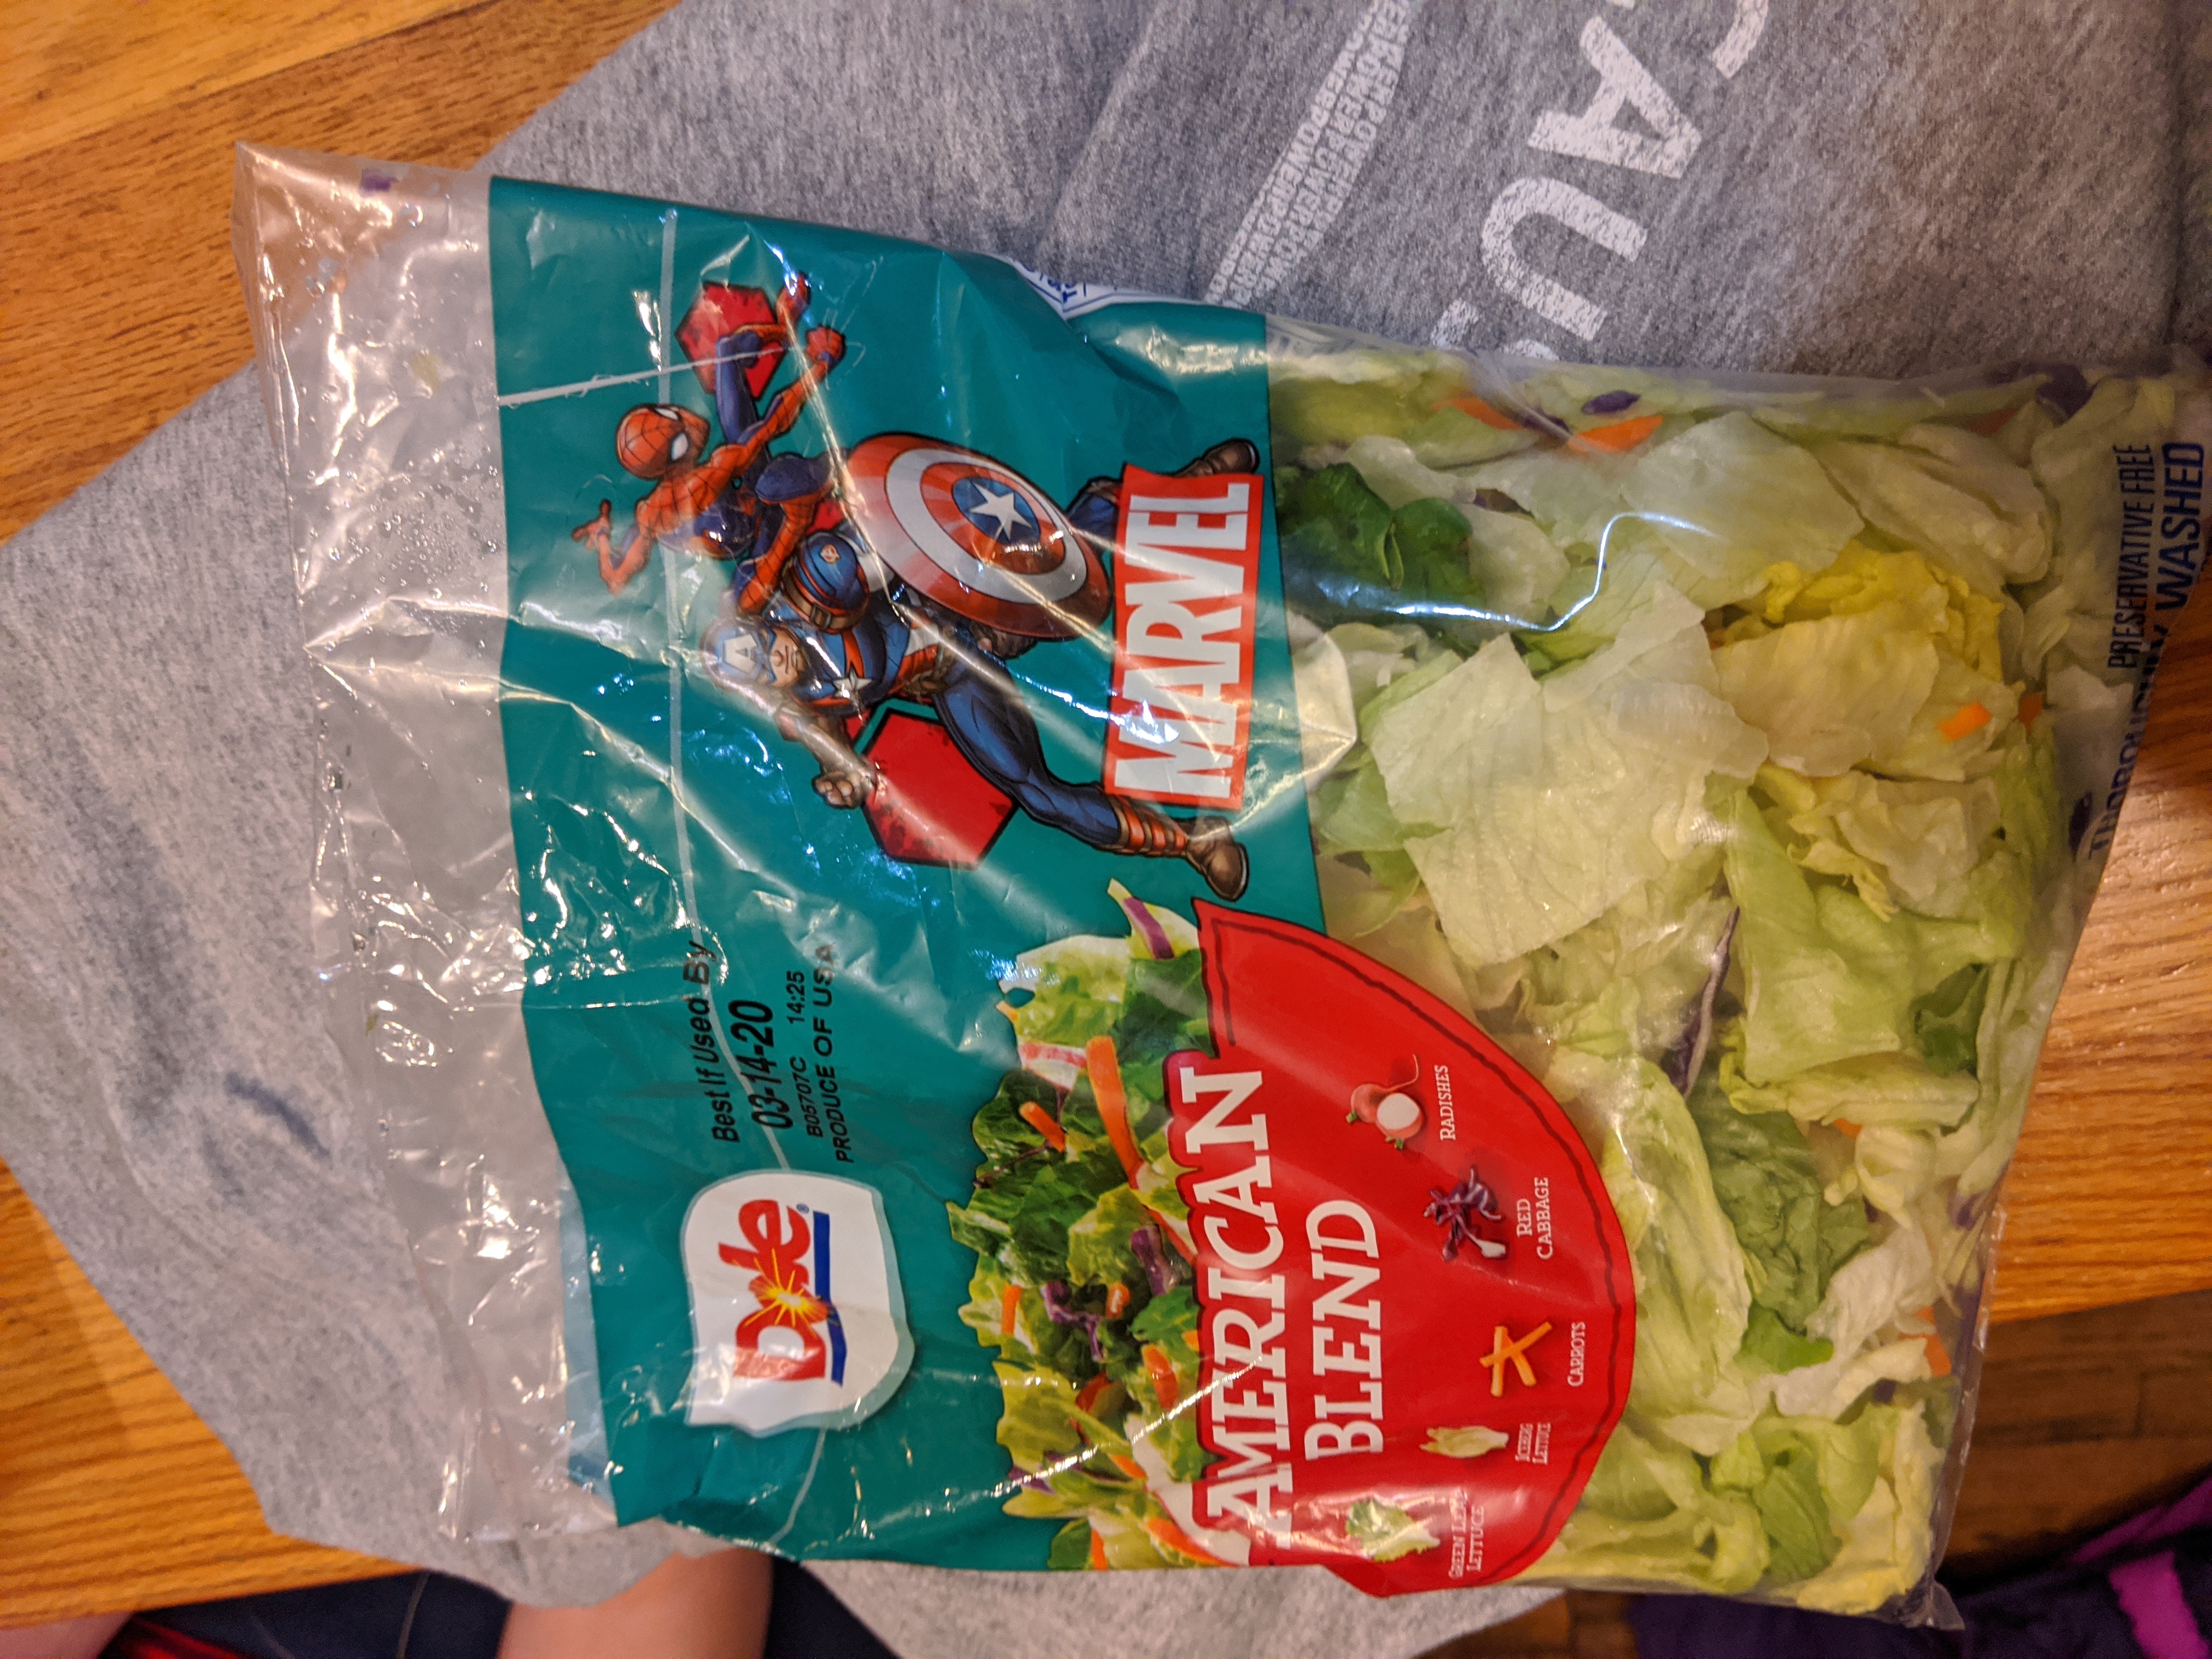 salad with Captain America tie-in